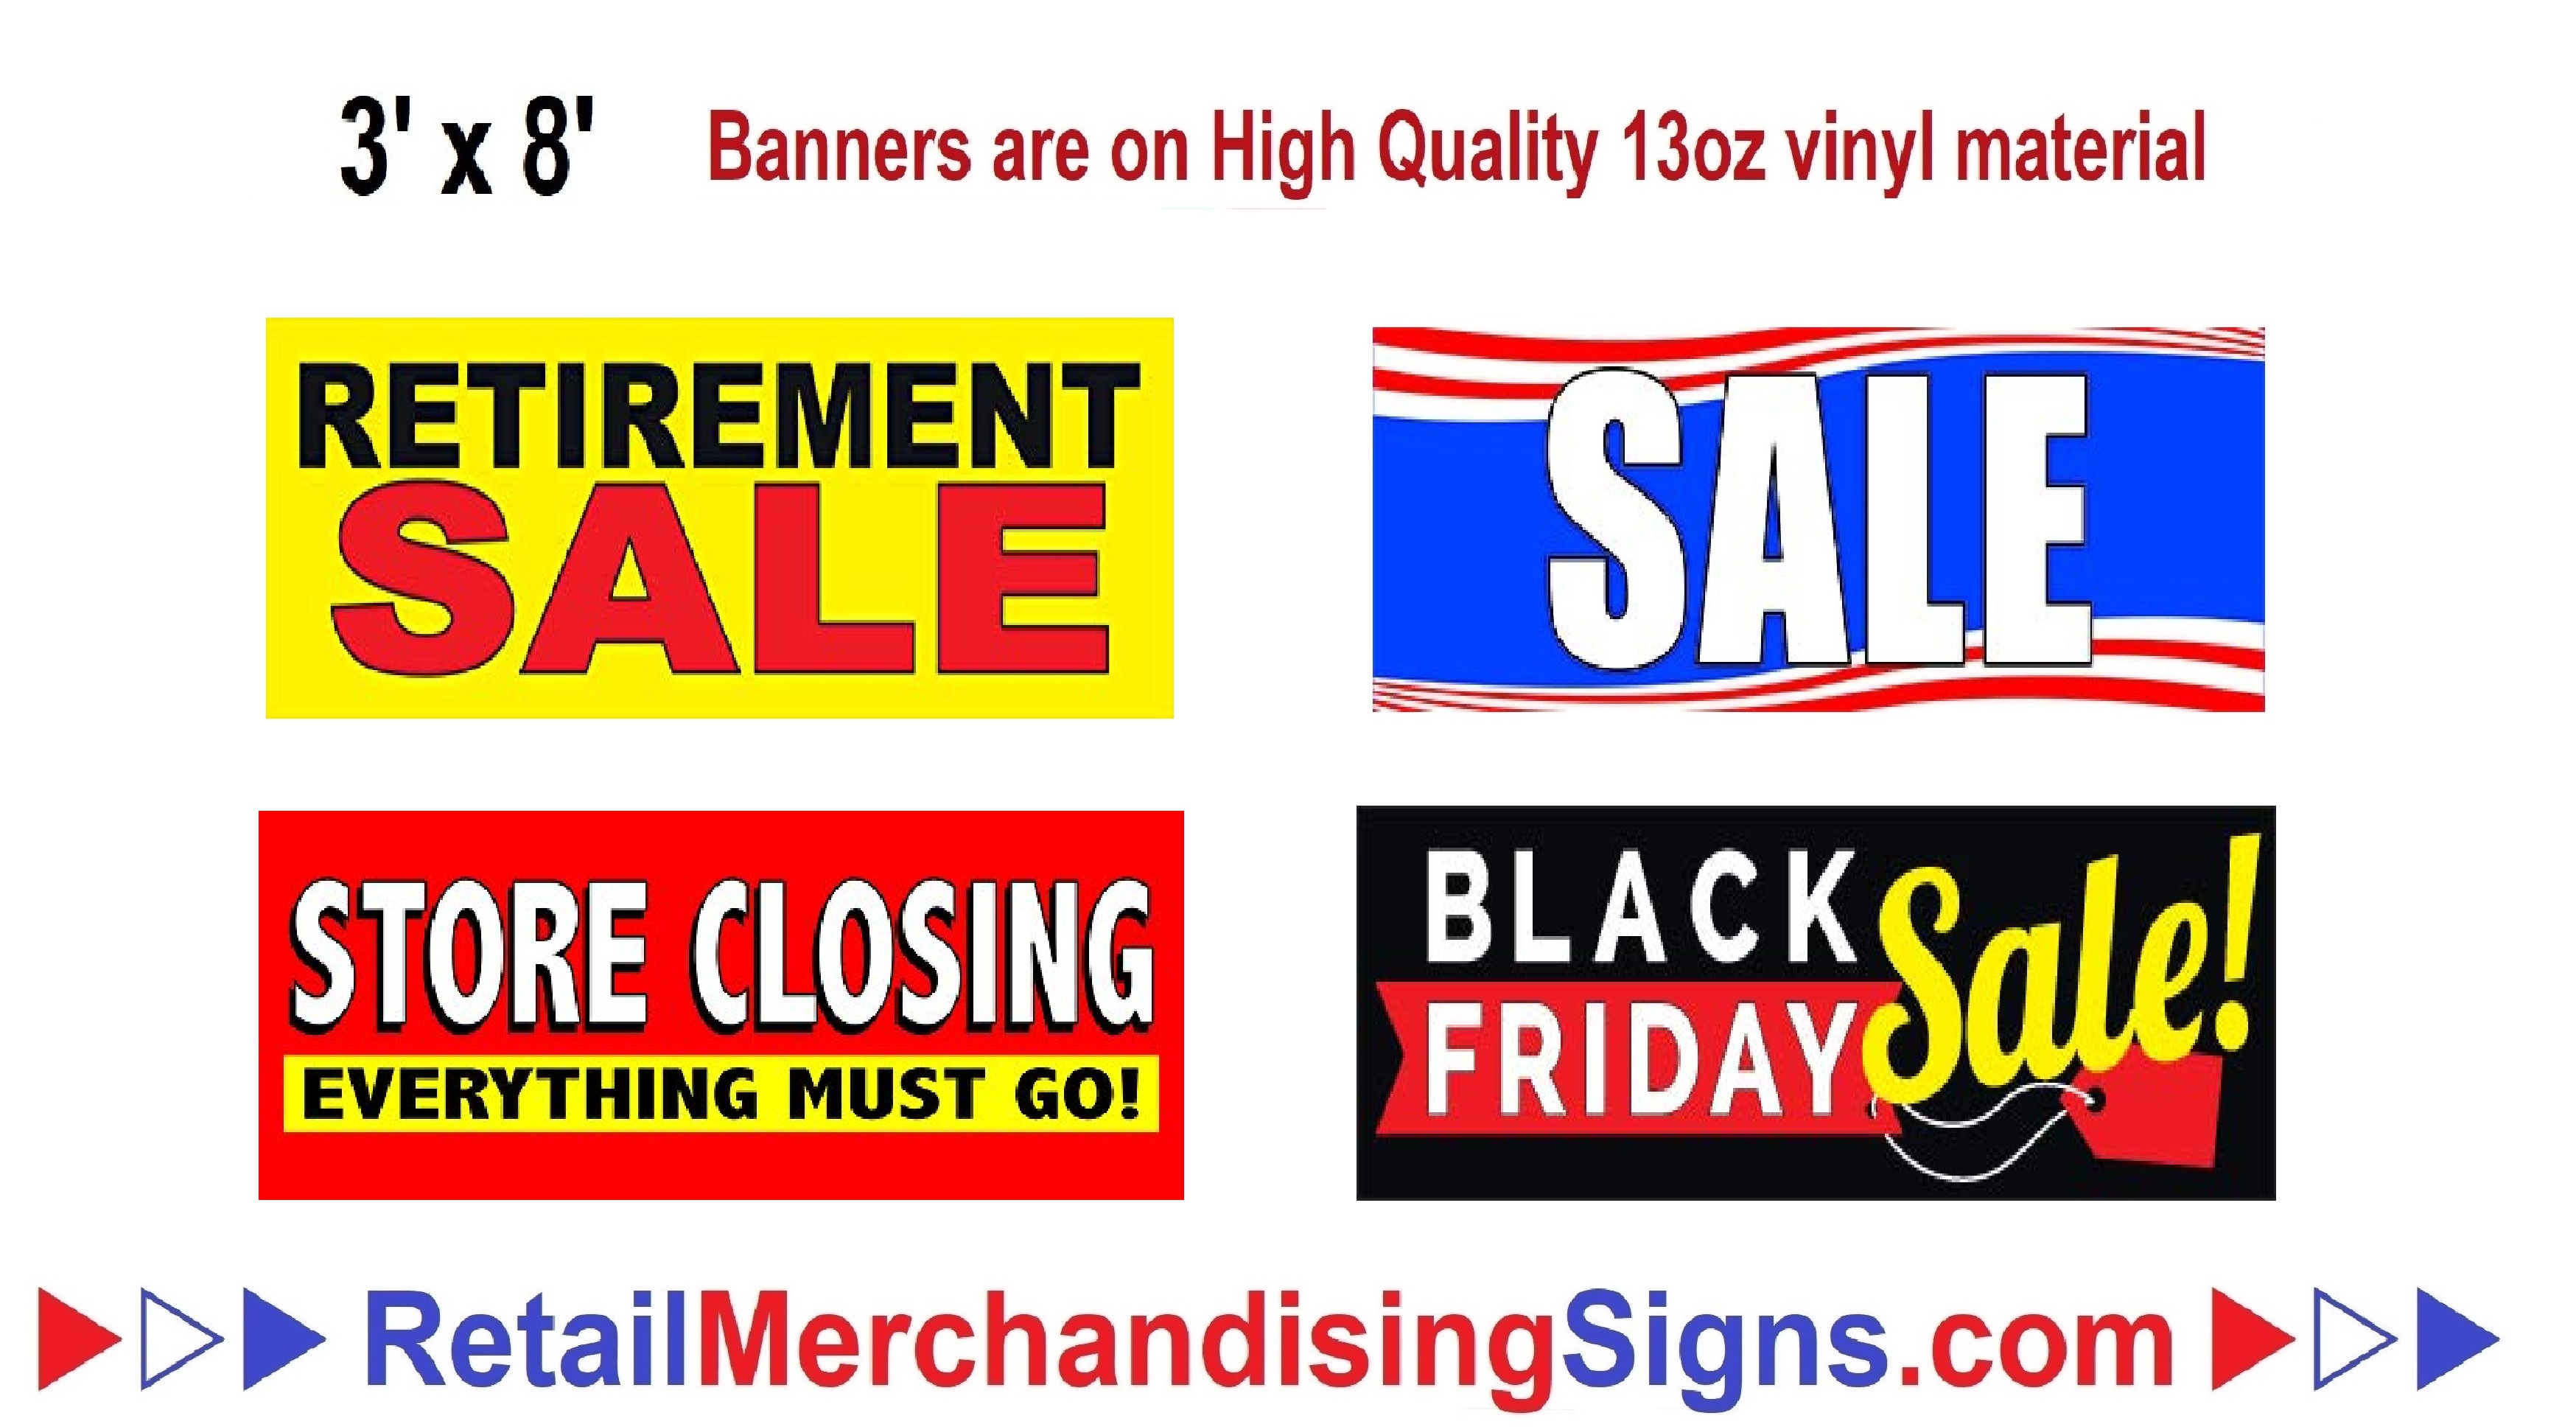 3' x 8' Banners